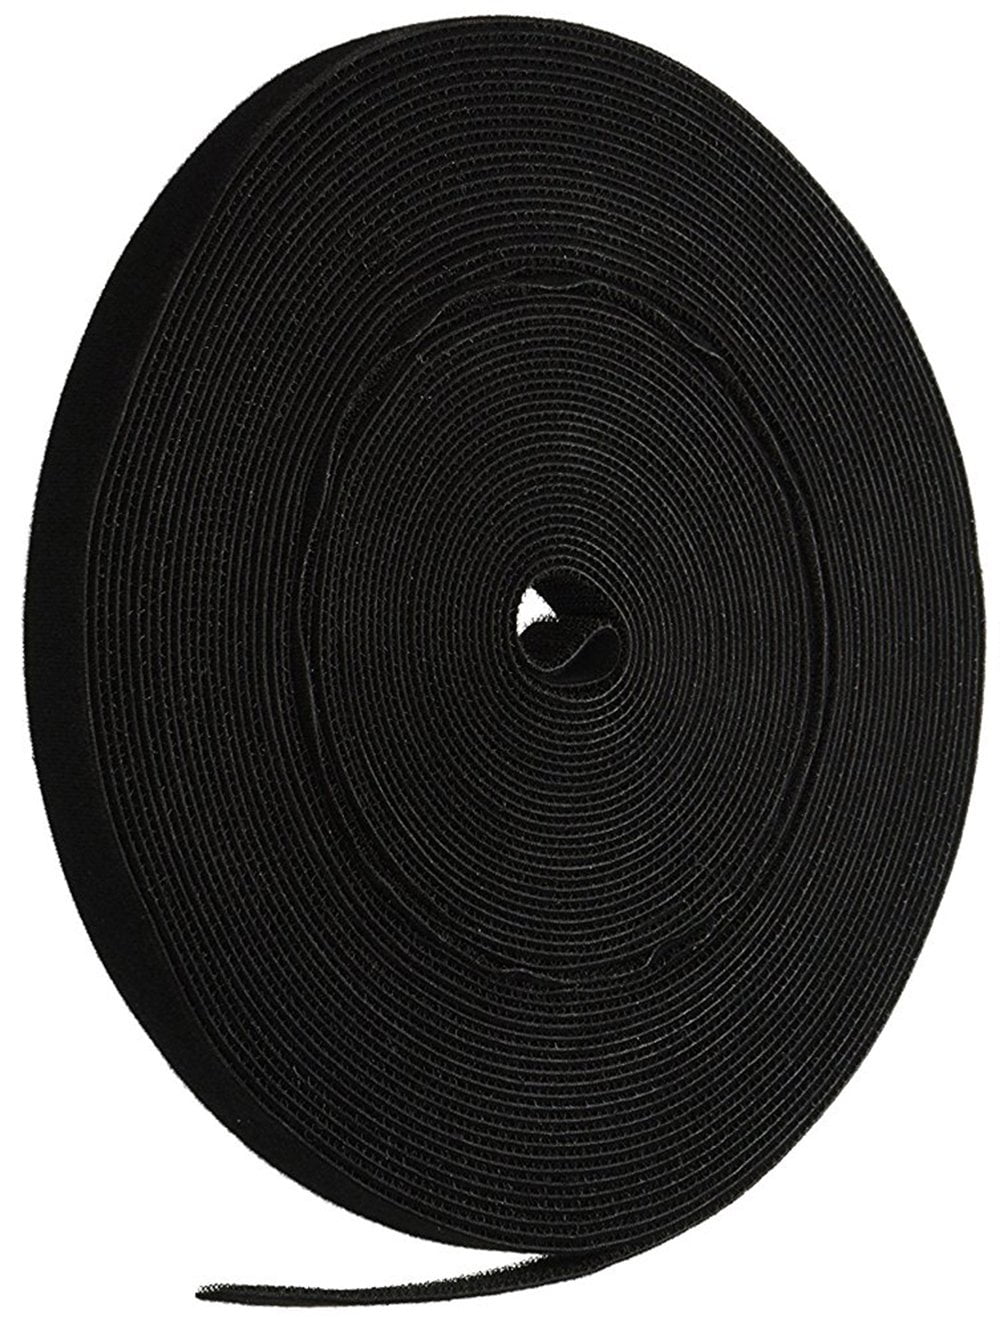 16 Sets 2x4 inch Black Heavy Duty Hook and Loop Tape ，hook and